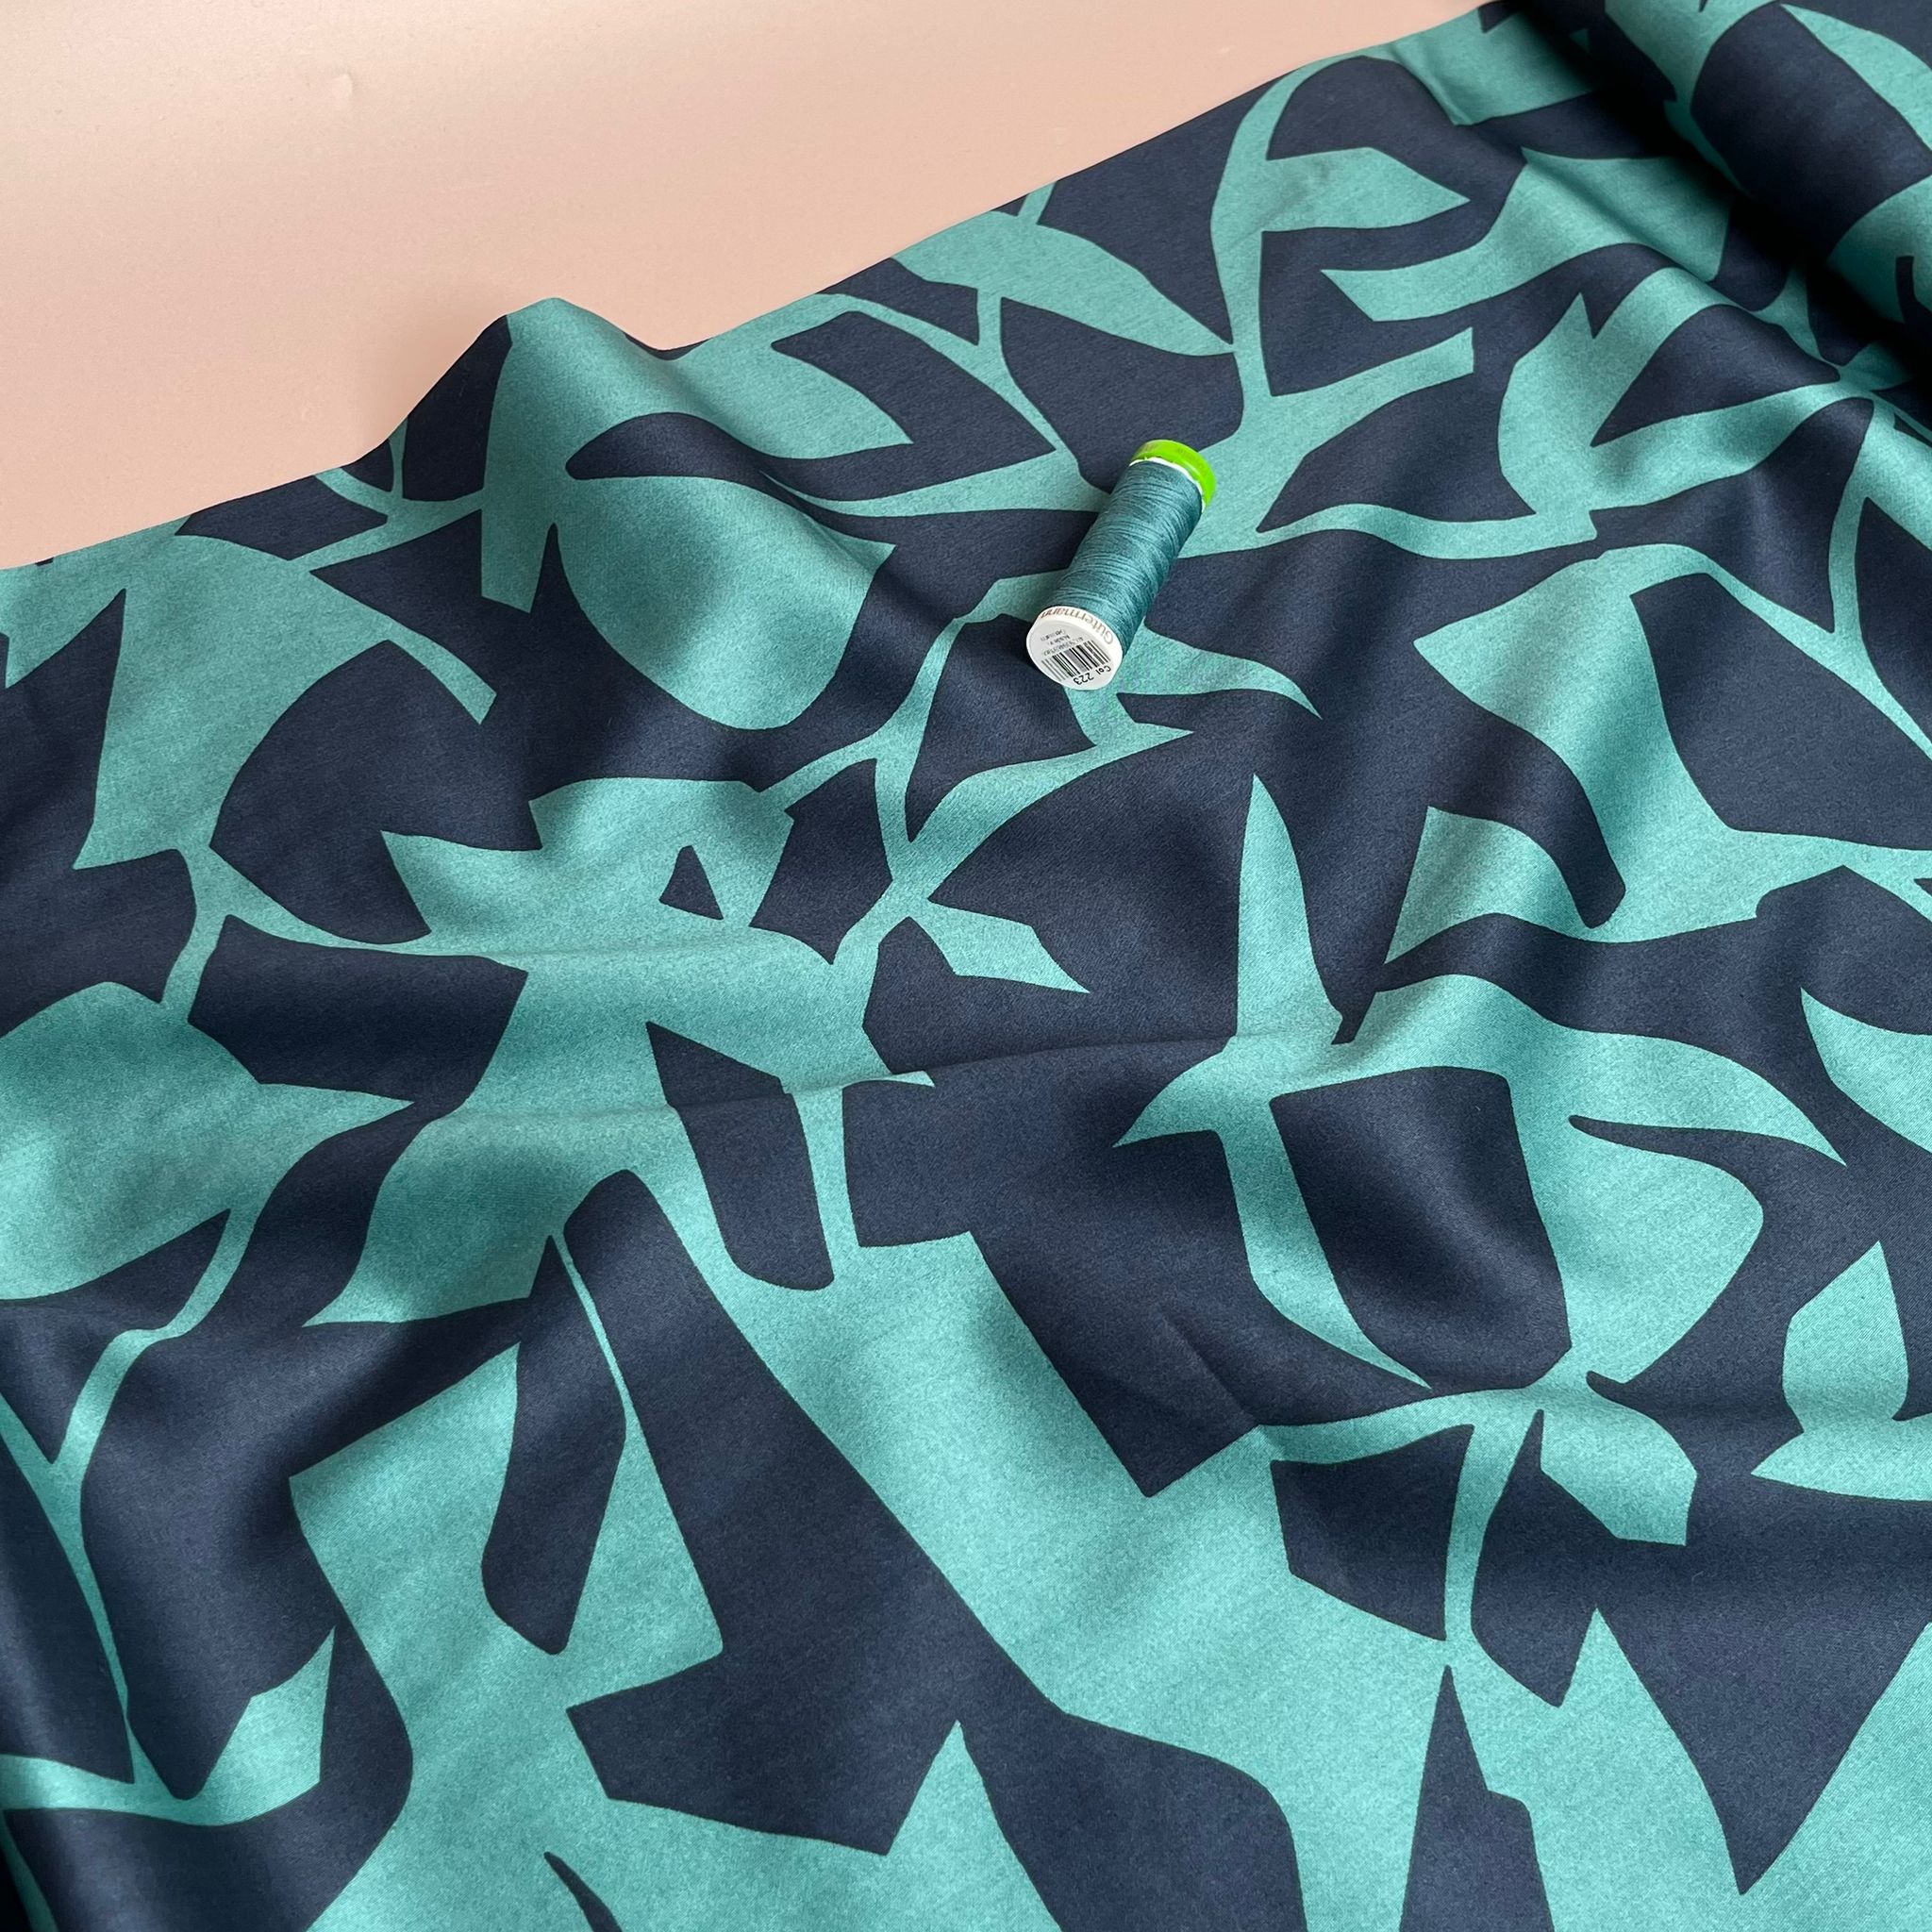 REMNANT 0.72 Metre - Abstract Shapes in Teal and Navy Cotton Sateen Fabric